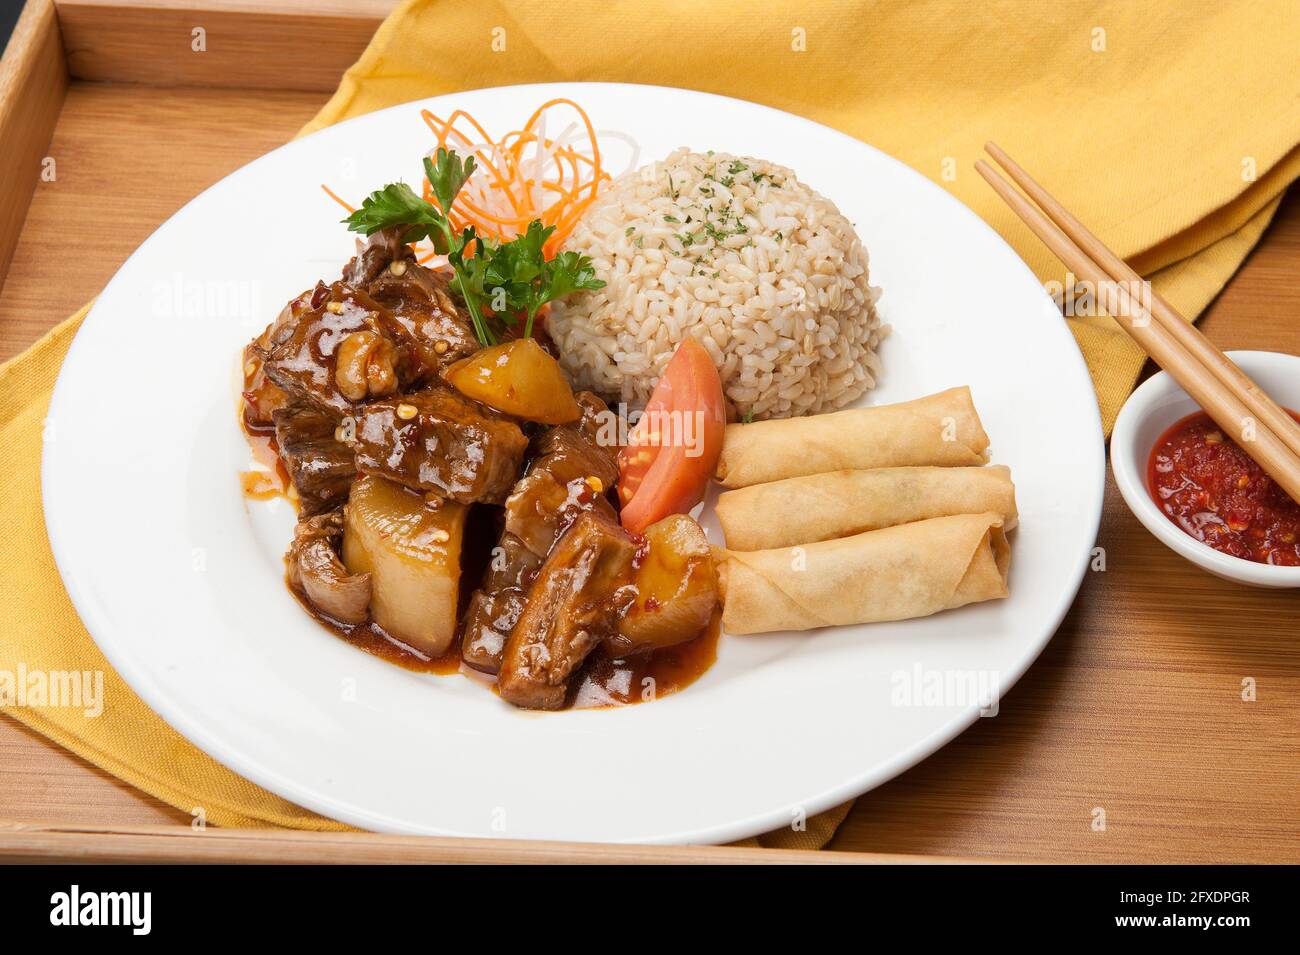 Beef ribs, spring rolls, and brown rice at a Korean restaurant. Stock Photo